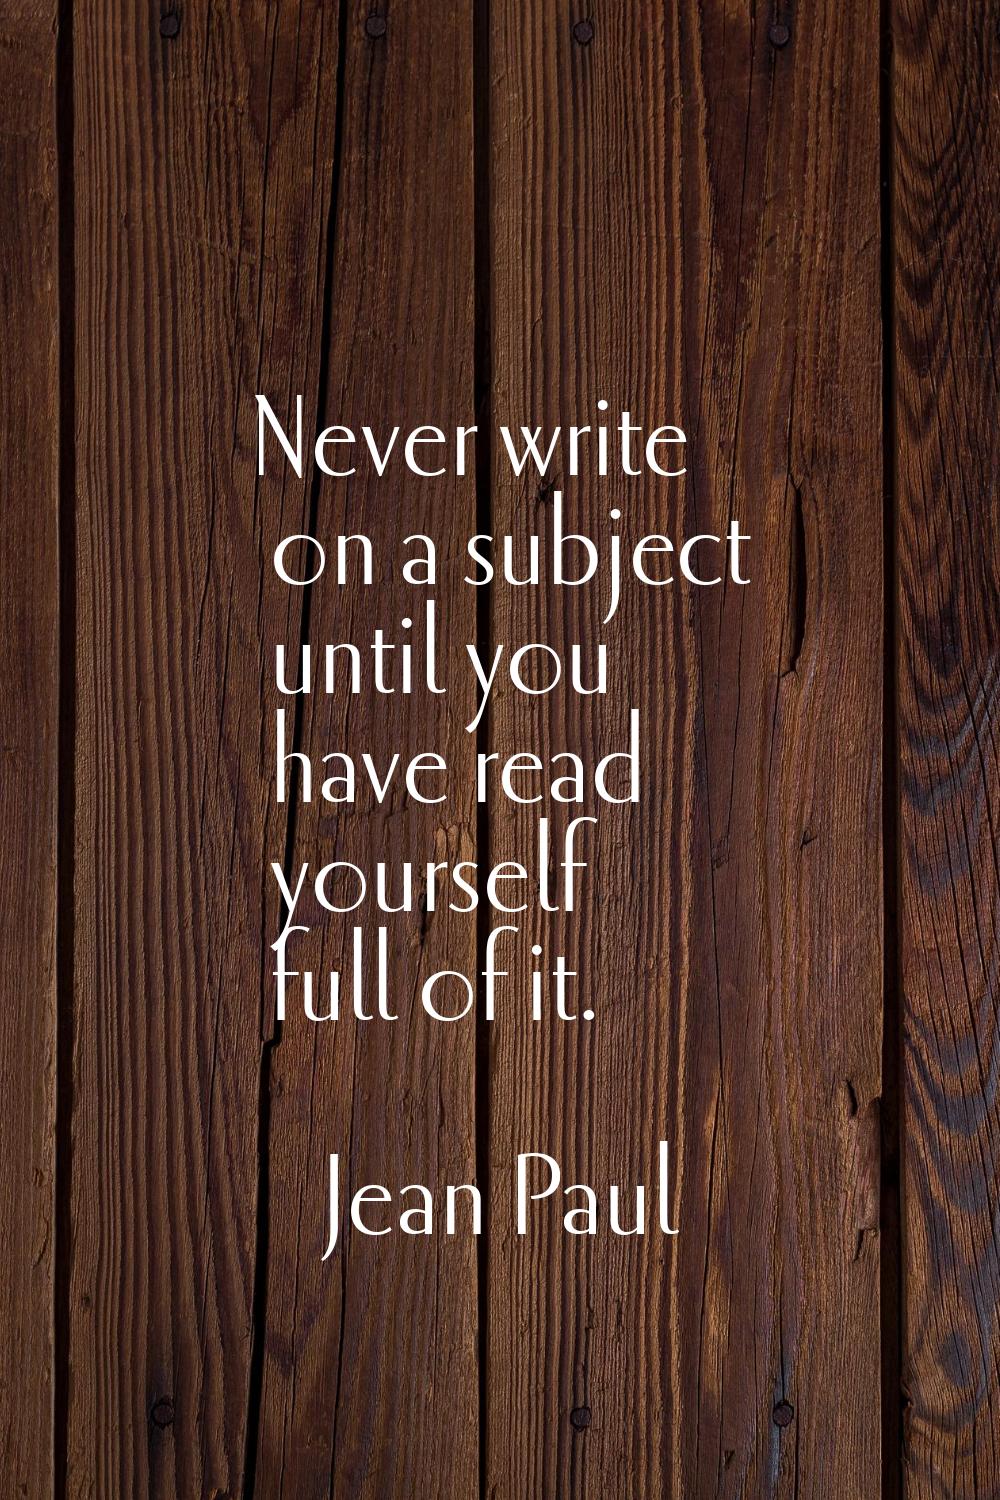 Never write on a subject until you have read yourself full of it.